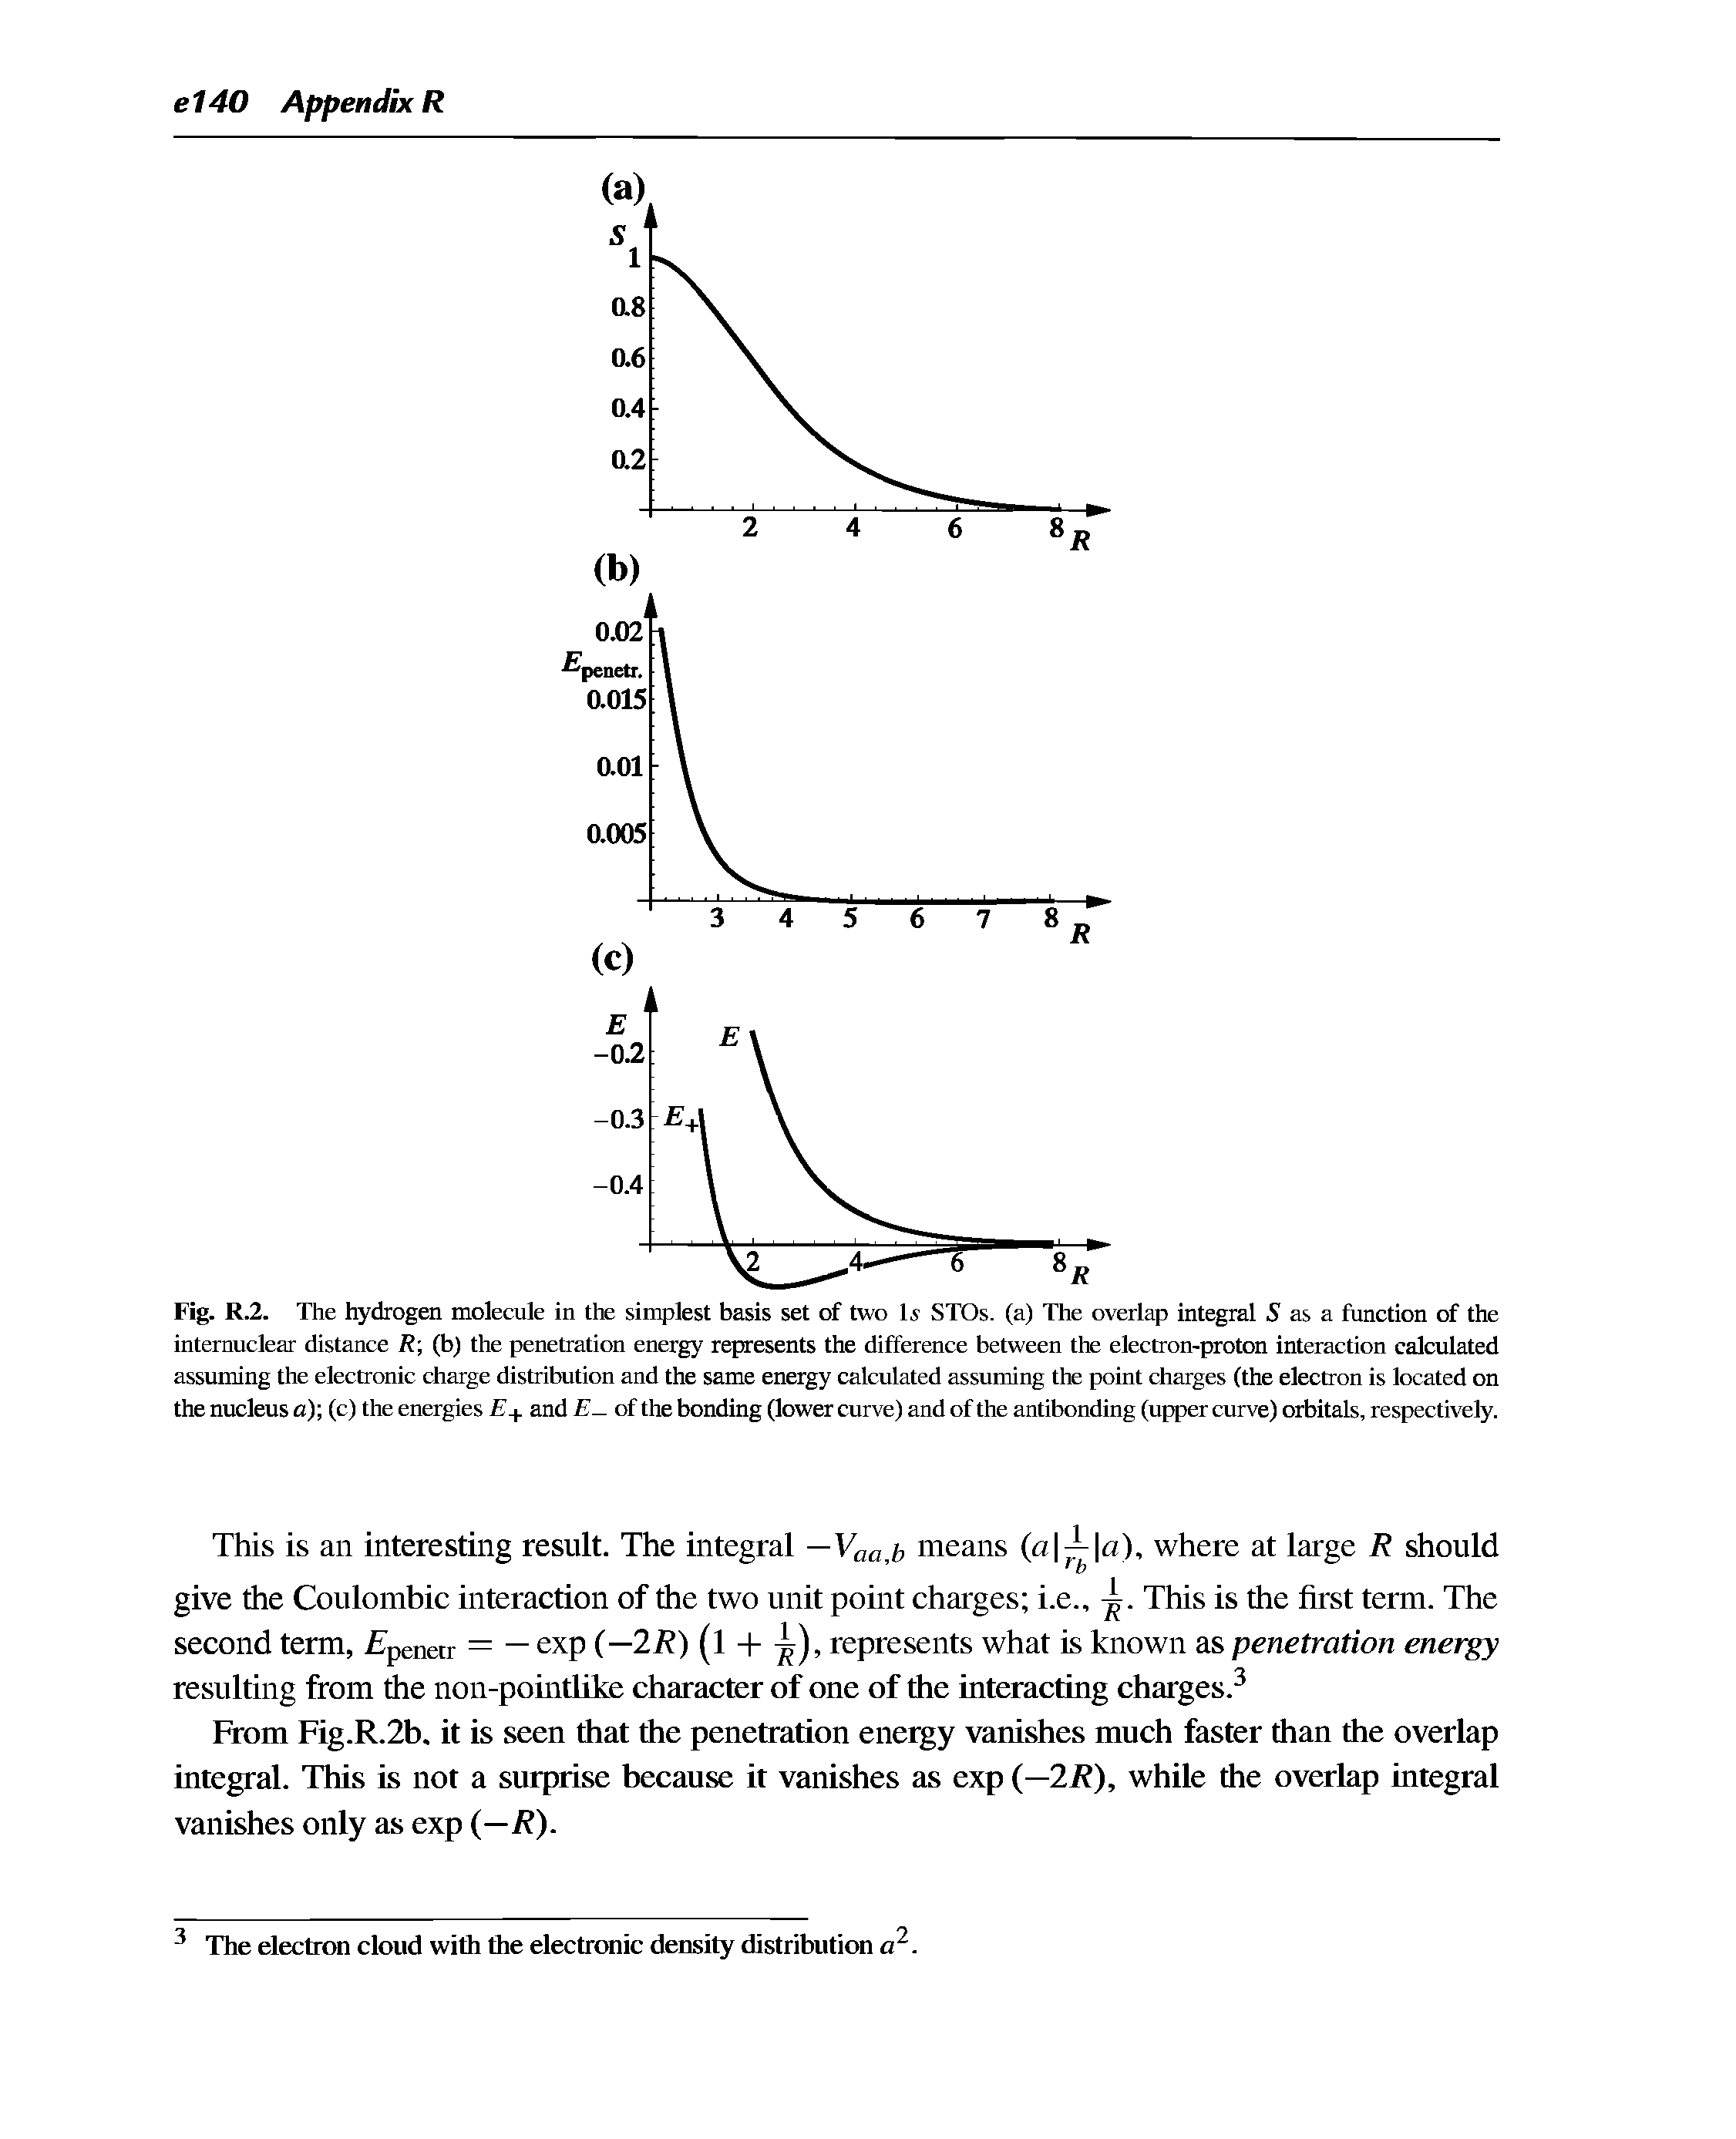 Fig. R.2. The hydrogen molecule in the simplest basis set of two Is STOs. (a) The overlap integral 5 as a function of the internuclear distance R (b) the penetration energy represents the difference between the electron-proton interaction calculated assuming the electronic charge distribution and the same energy calculated assuming the point charges (the electron is located on the nucleus c) (c) the energies + and E- of the bonding (lower curve) and of the antibonding (upper curve) orbitals, respectively.